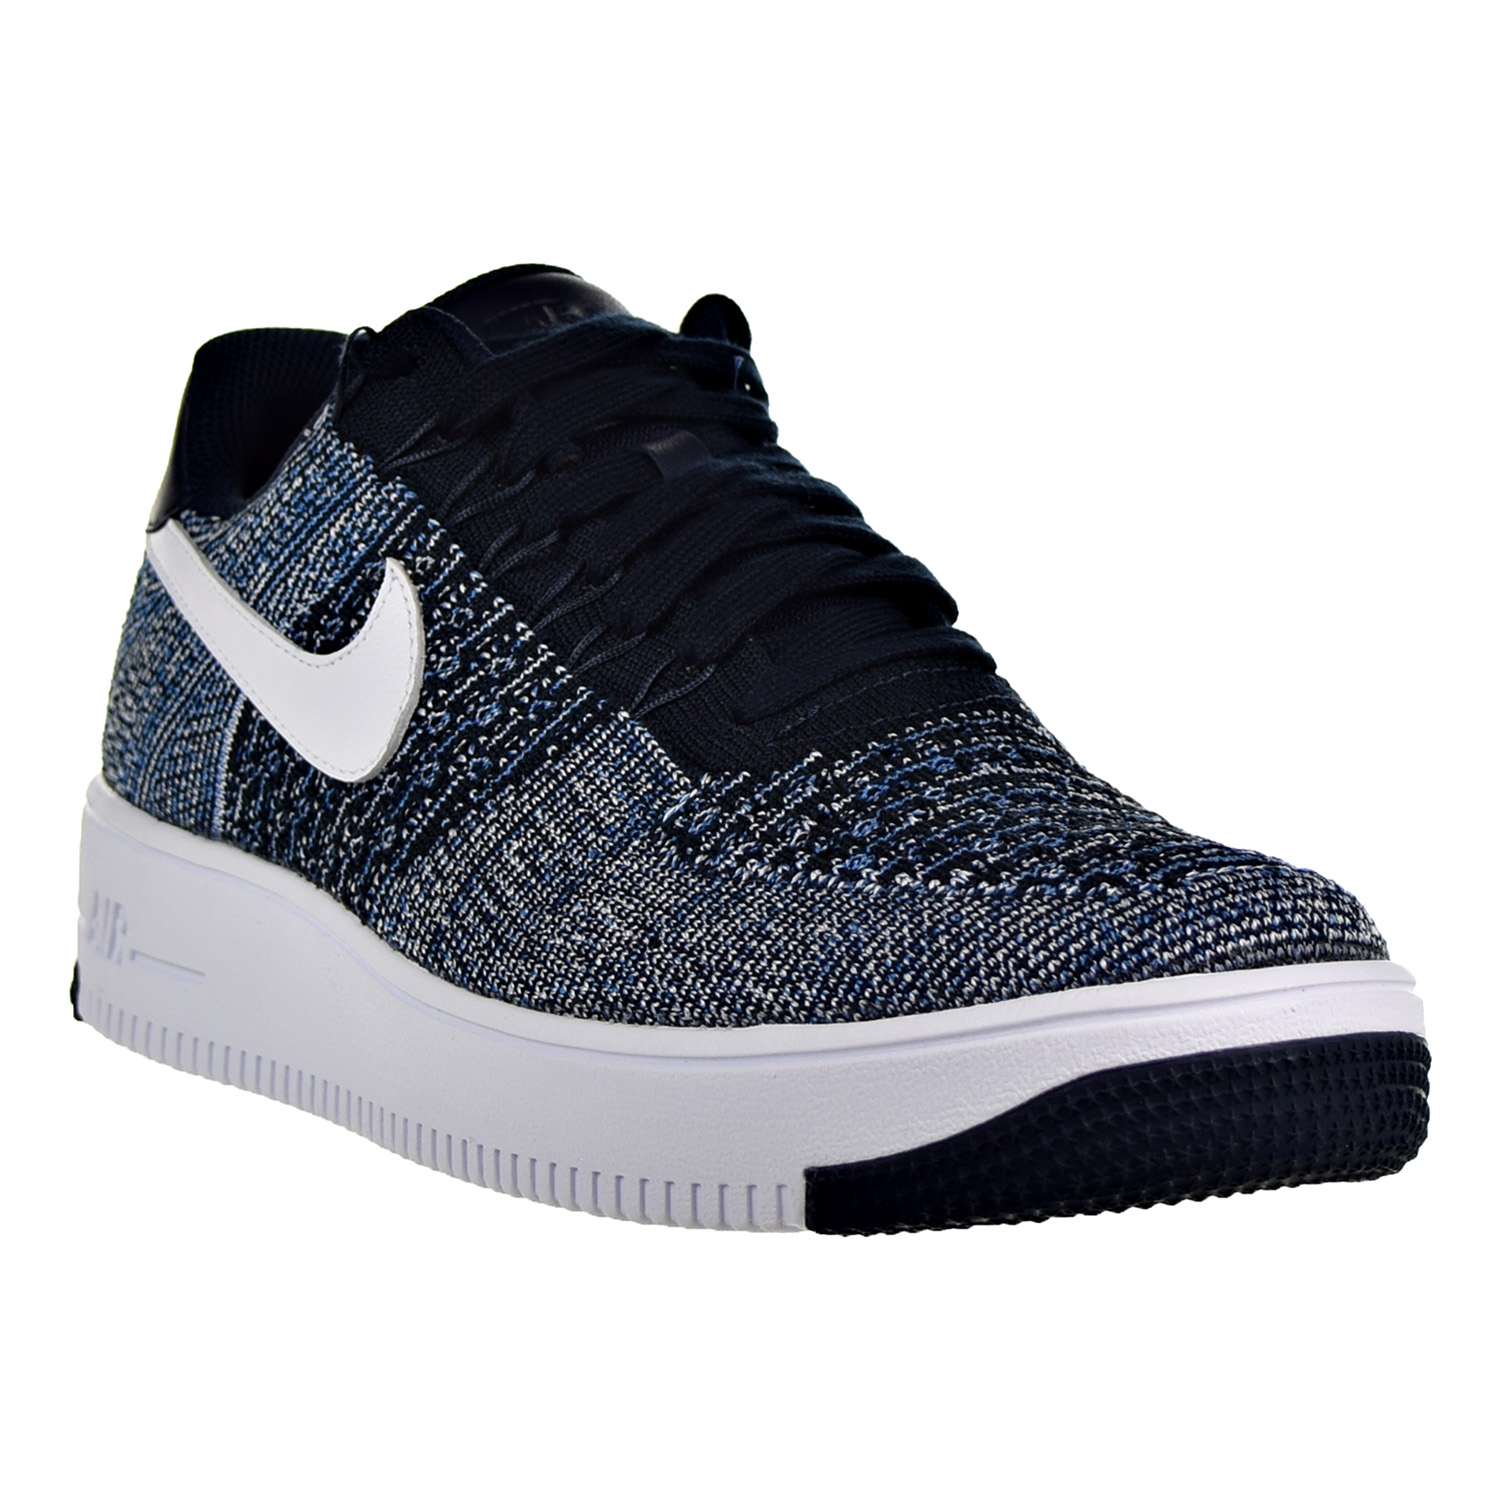 Circumference Margaret Mitchell protest Nike Air Force 1 Ultra Flyknit Low Men's Shoes Obsidian/White/Blue  817419-400